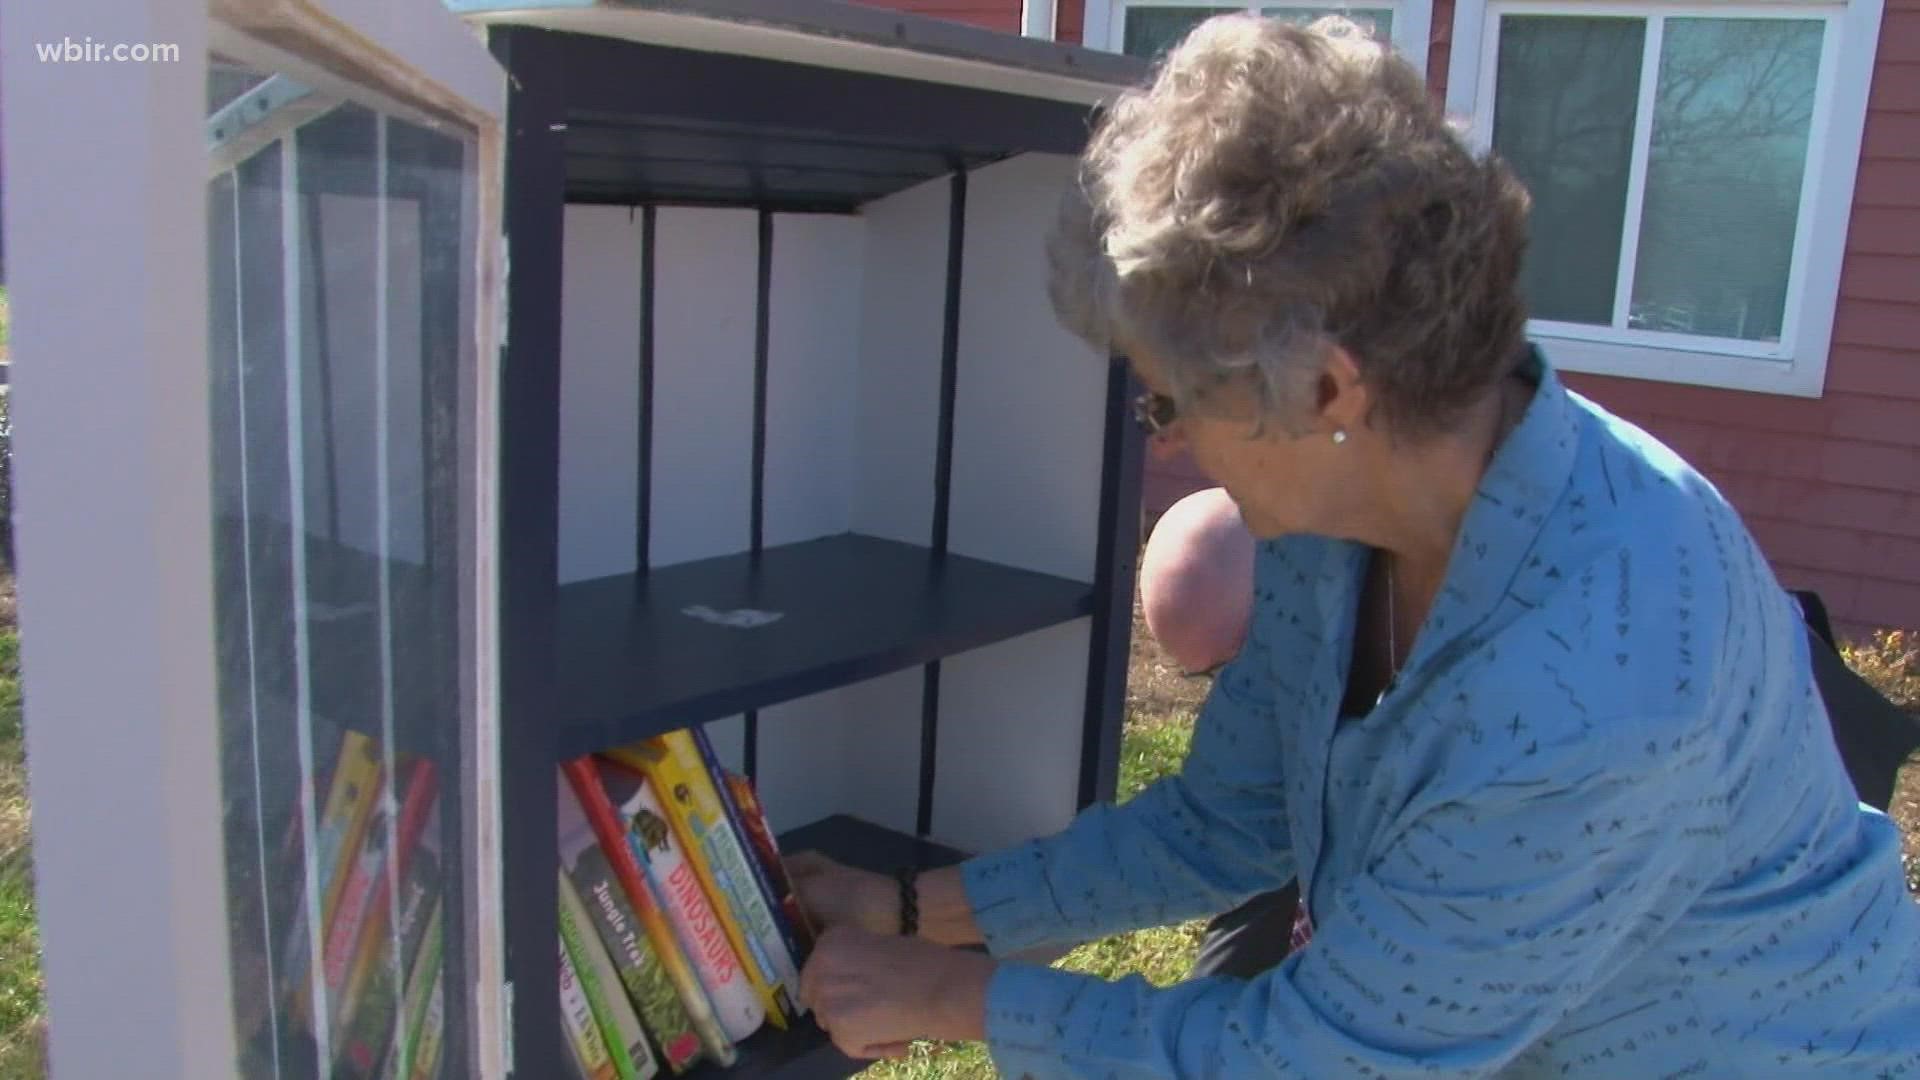 Members of the Rotary Club of Knoxville opened a Little Free Library to serve people, nearly 40% of whom are children in the neighborhood.